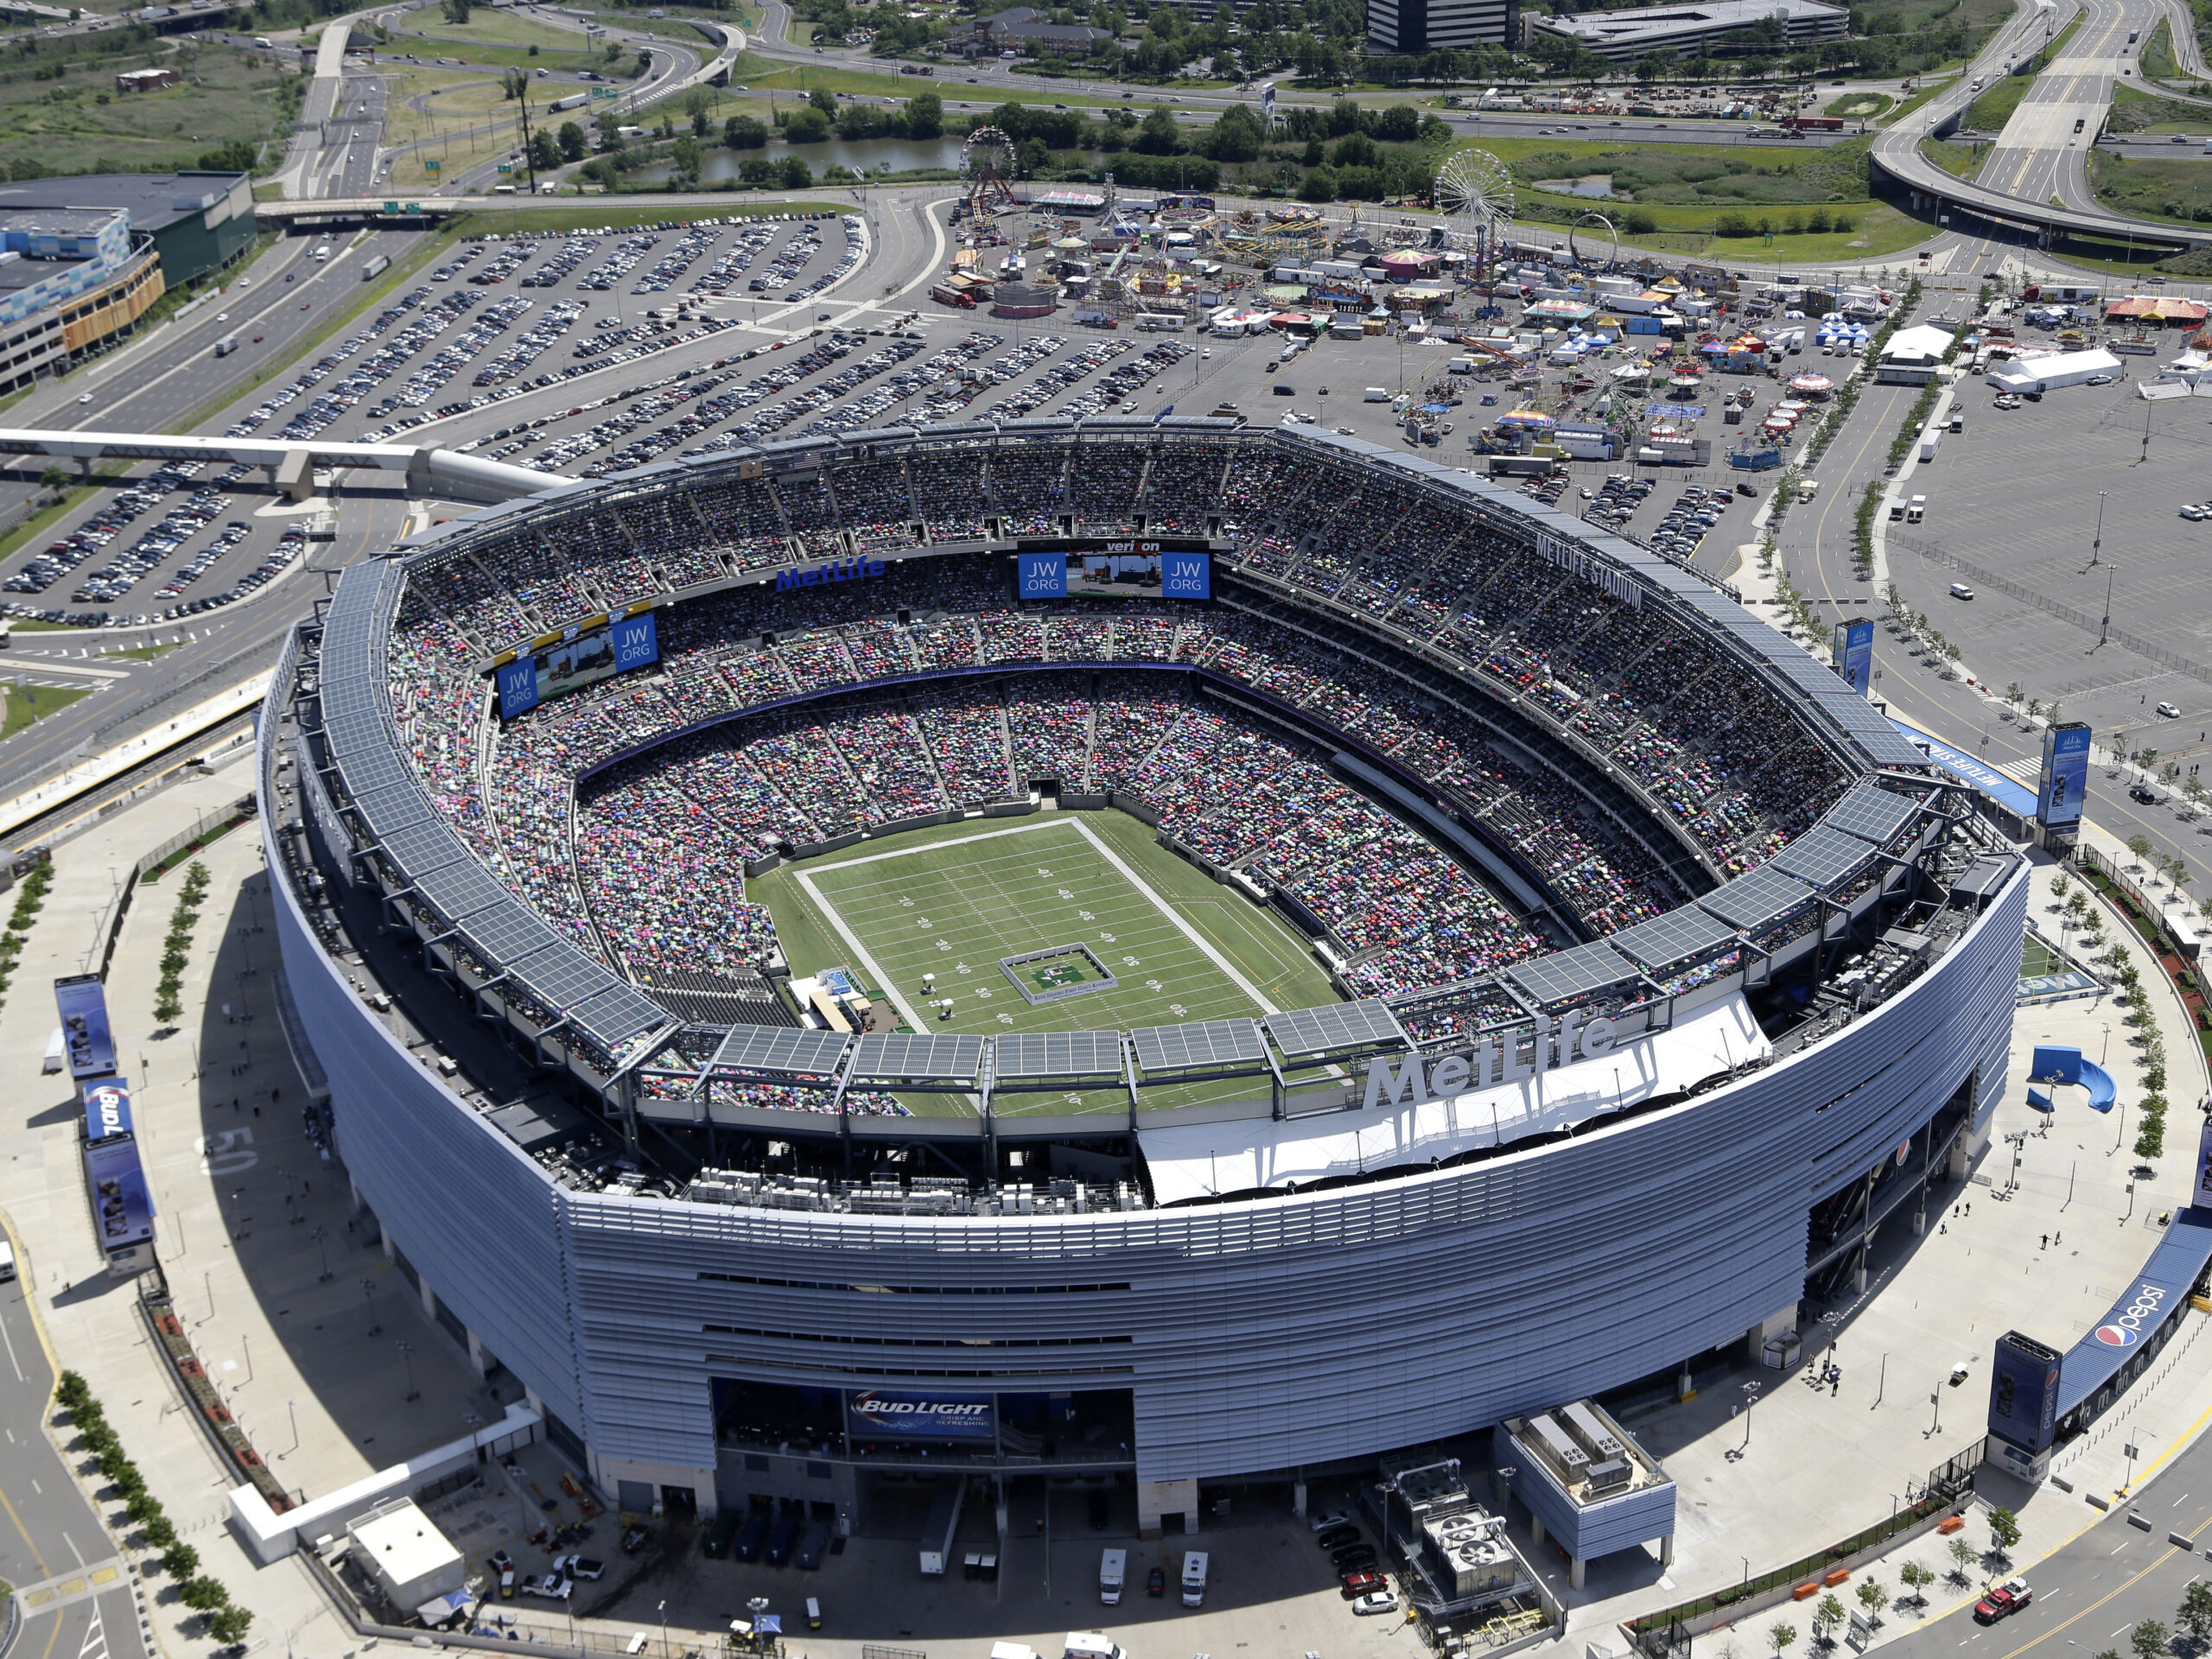 The 2026 World Cup final will take place at New Jersey’s MetLife Stadium